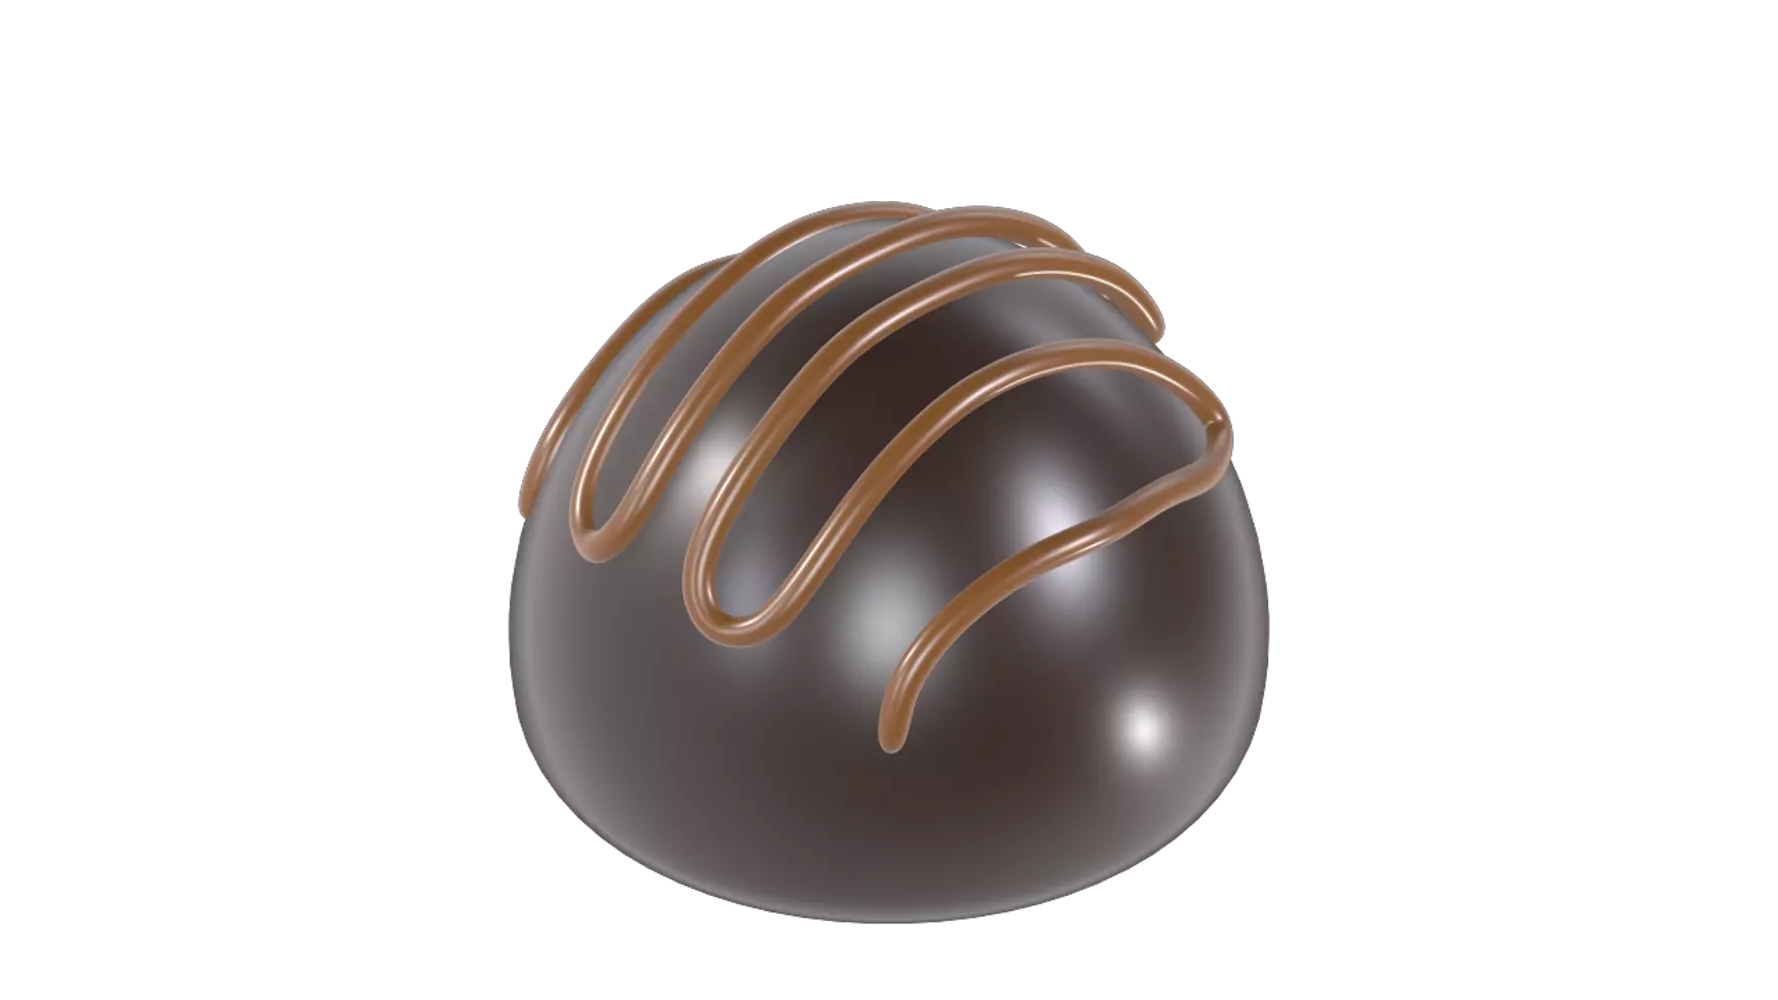 Half Chocolate Ball With Caramel 3D Graphic